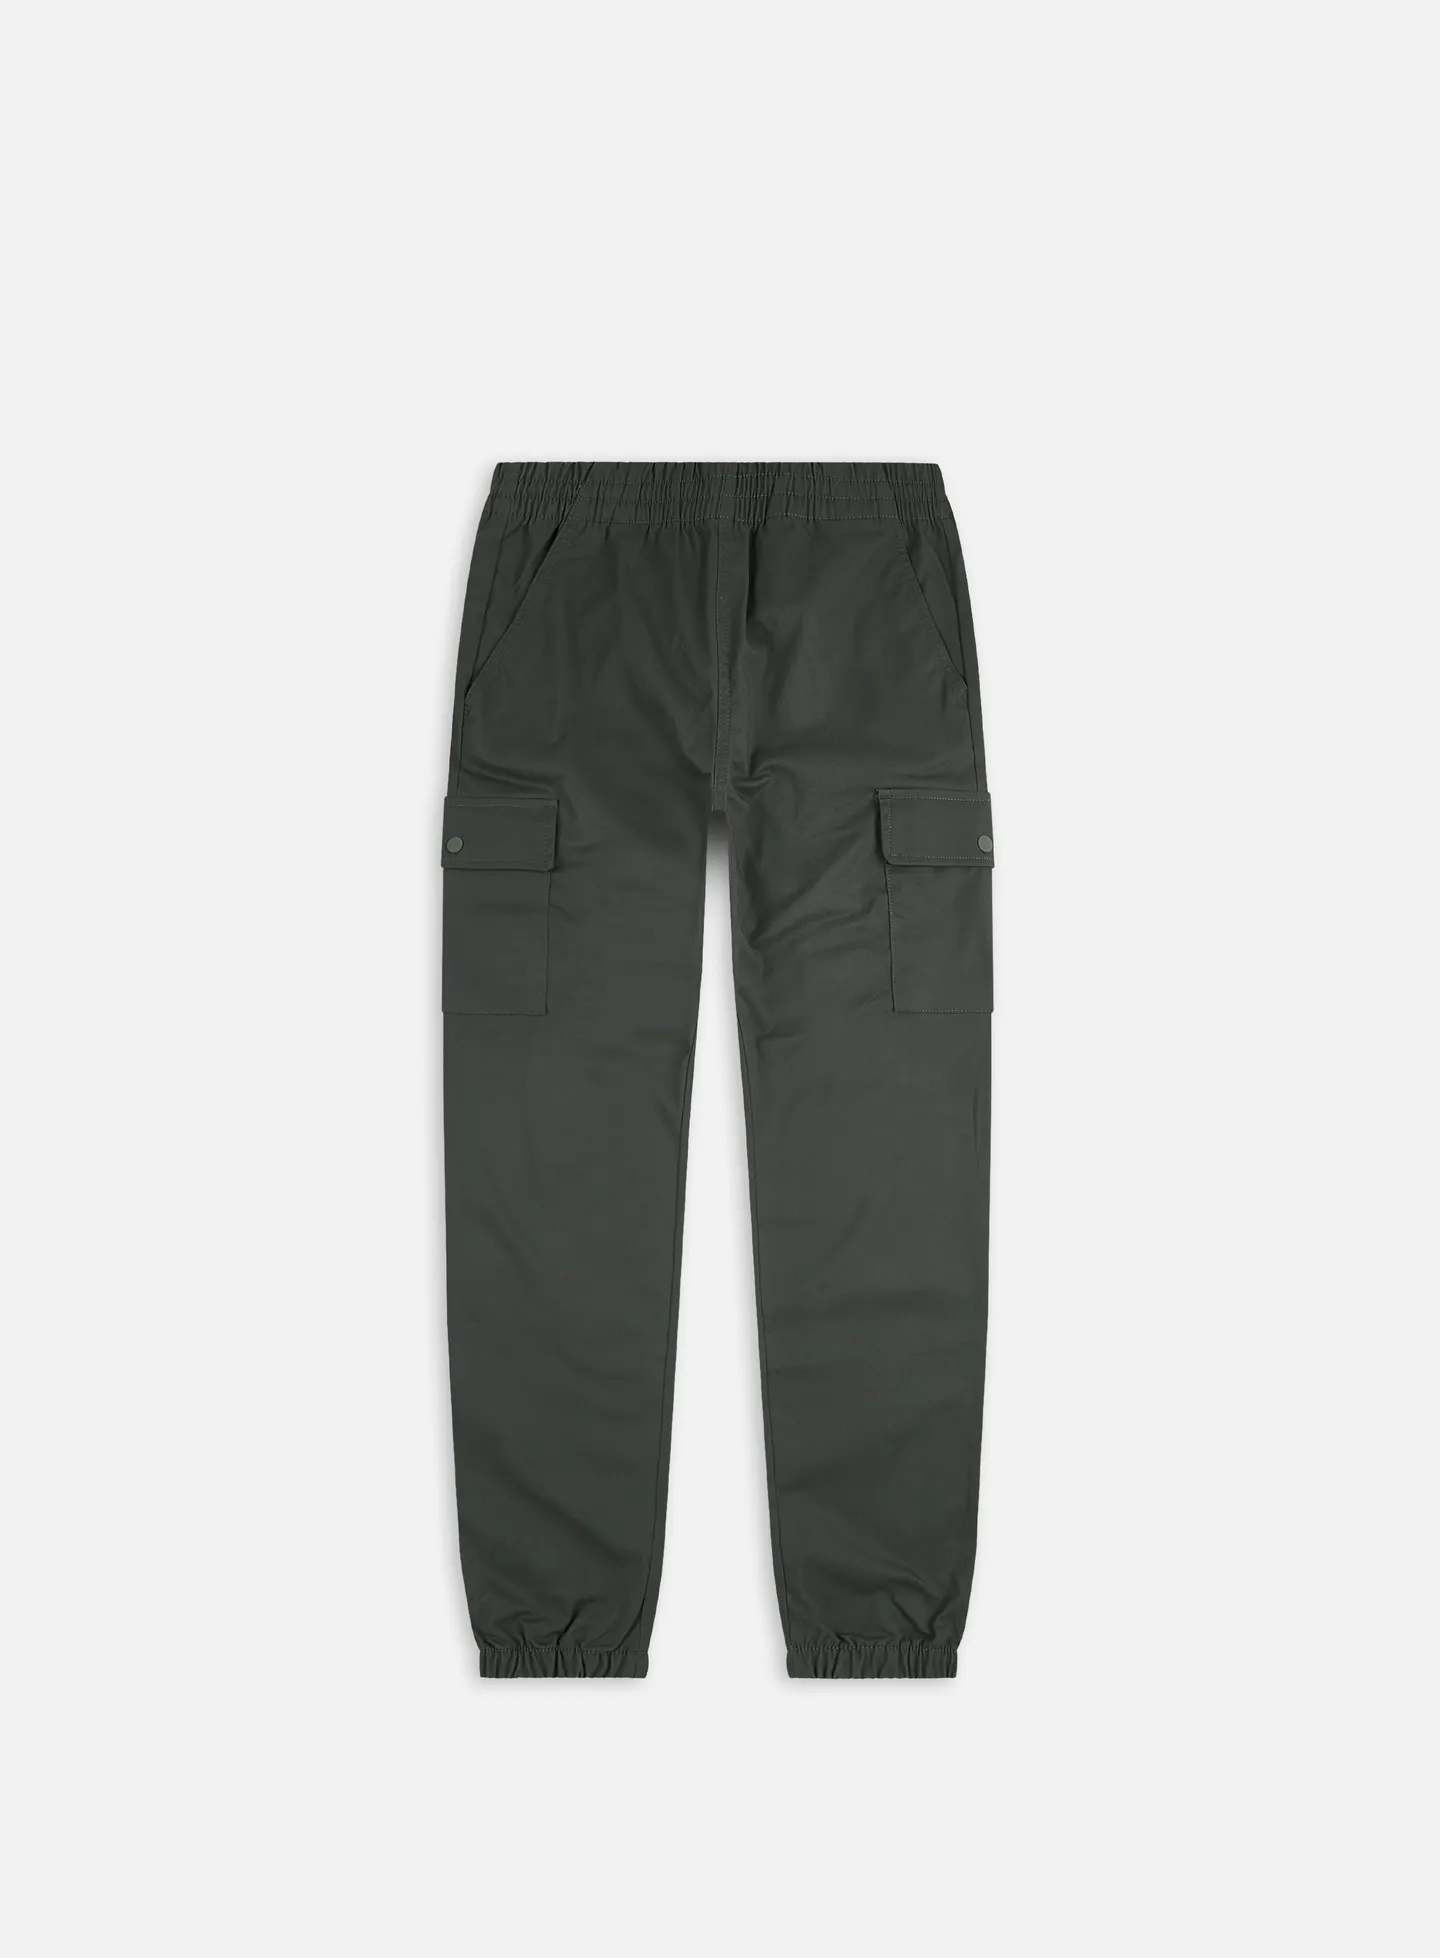 75% OFF the New Balance Woven Cargo Pants — Sneaker Shouts